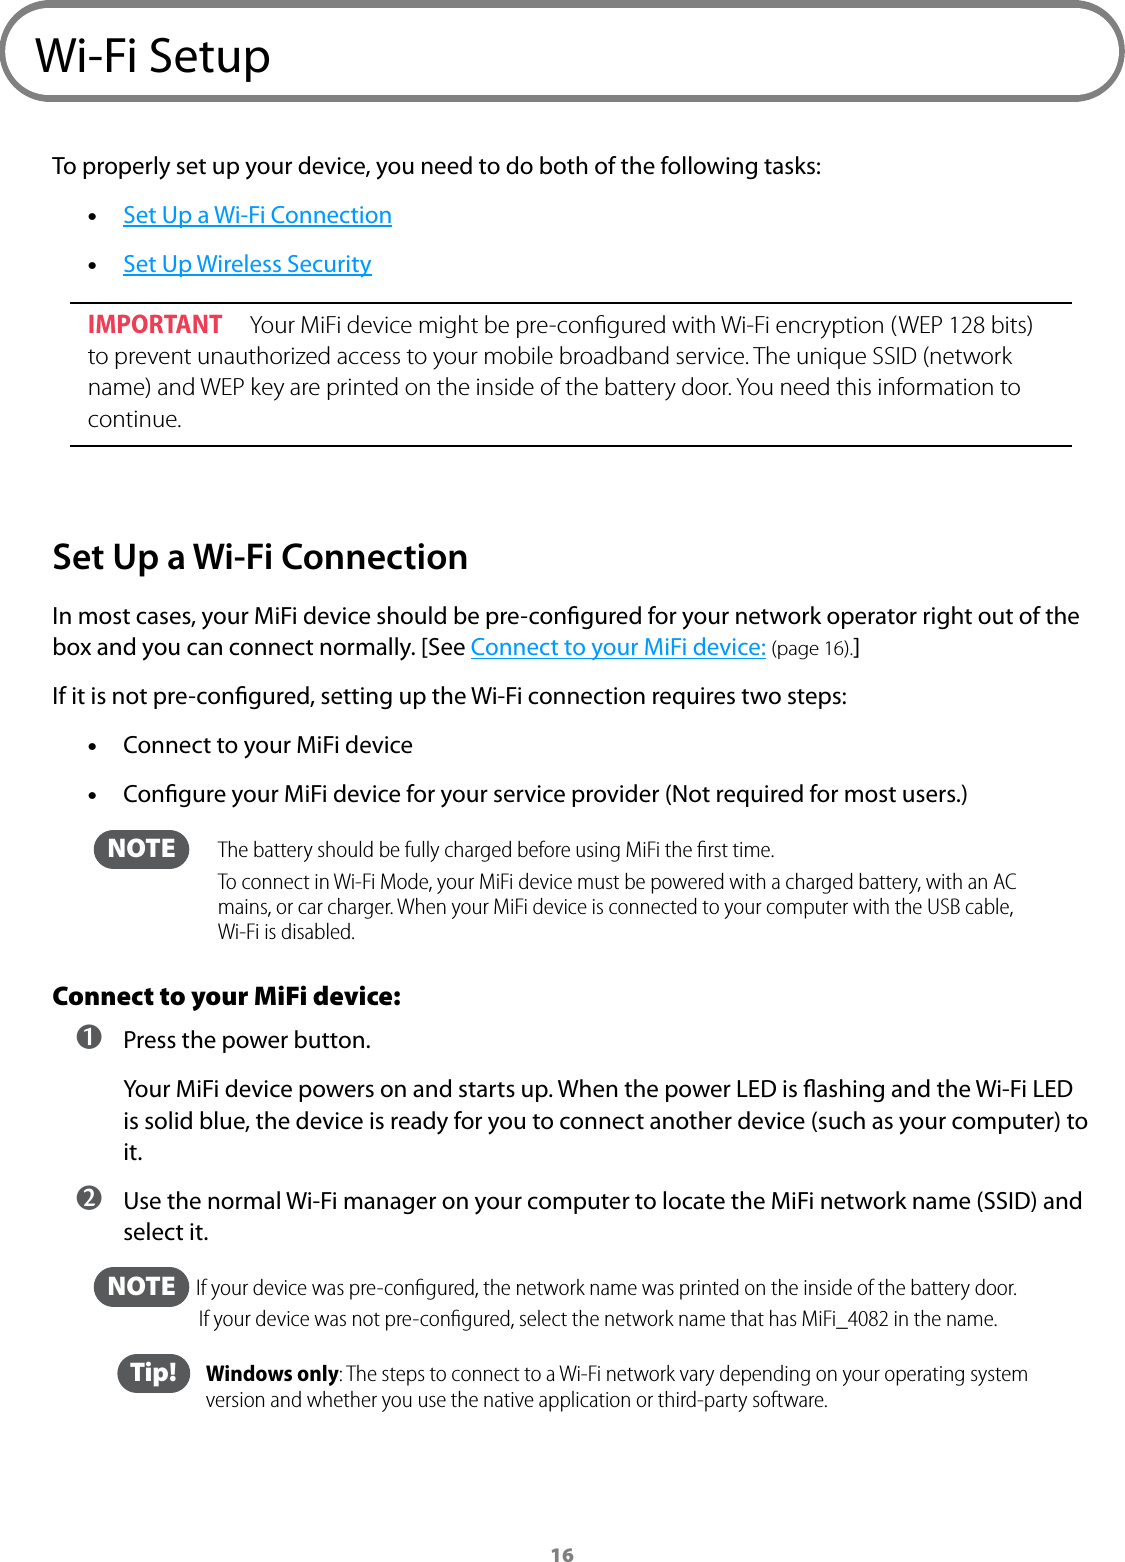 16Wi-Fi SetupTo properly set up your device, you need to do both of the following tasks: •Set Up a Wi-Fi Connection •Set Up Wireless SecurityIMPORTANT  Your MiFi device might be pre-conﬁgured with Wi-Fi encryption (WEP 128 bits) to prevent unauthorized access to your mobile broadband service. The unique SSID (network name) and WEP key are printed on the inside of the battery door. You need this information to continue.Set Up a Wi-Fi ConnectionIn most cases, your MiFi device should be pre-congured for your network operator right out of the box and you can connect normally. [See Connect to your MiFi device: (page 16).]If it is not pre-congured, setting up the Wi-Fi connection requires two steps: •Connect to your MiFi device •Congure your MiFi device for your service provider (Not required for most users.)  NOTE     The battery should be fully charged before using MiFi the ﬁrst time.  To connect in Wi-Fi Mode, your MiFi device must be powered with a charged battery, with an AC mains, or car charger. When your MiFi device is connected to your computer with the USB cable, Wi-Fi is disabled.Connect to your MiFi device: ➊ Press the power button.Your MiFi device powers on and starts up. When the power LED is ashing and the Wi-Fi LED is solid blue, the device is ready for you to connect another device (such as your computer) to it. ➋ Use the normal Wi-Fi manager on your computer to locate the MiFi network name (SSID) and select it.  NOTE    If your device was pre-conﬁgured, the network name was printed on the inside of the battery door. If your device was not pre-conﬁgured, select the network name that has MiFi_4082 in the name.  Tip!   Windows only: The steps to connect to a Wi-Fi network vary depending on your operating system version and whether you use the native application or third-party software.